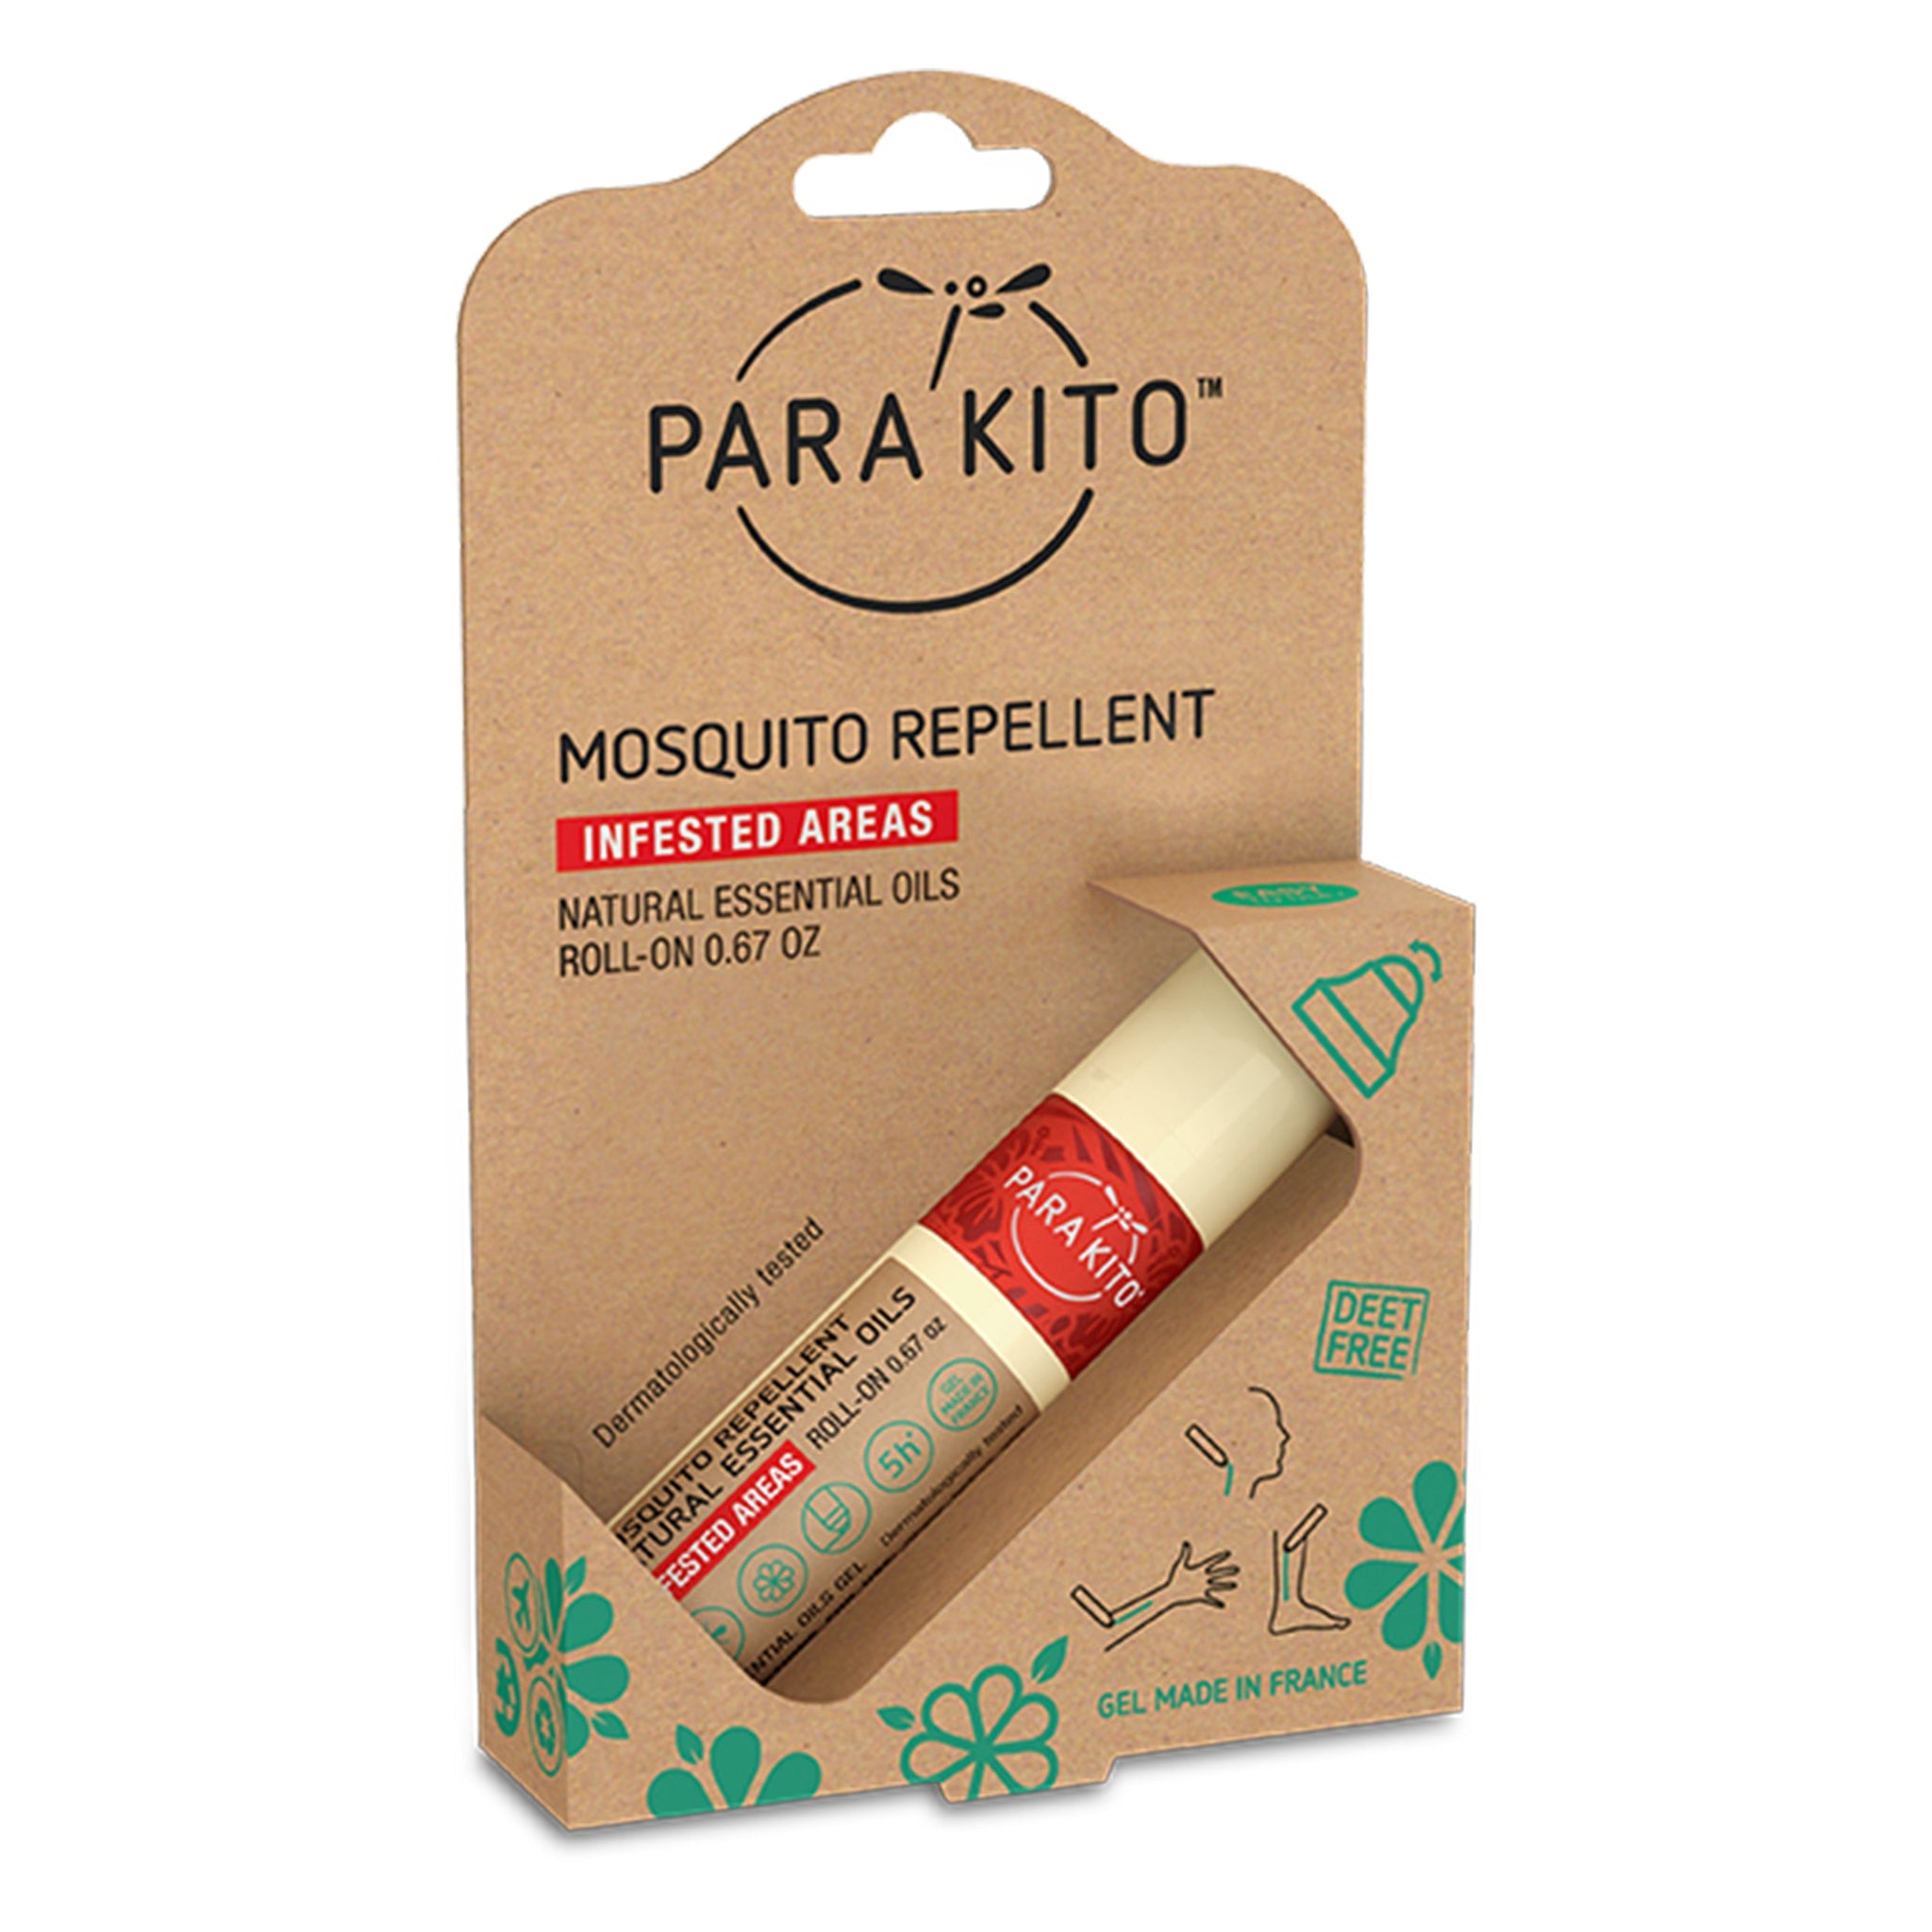 Mosquito Repellent Roll-on